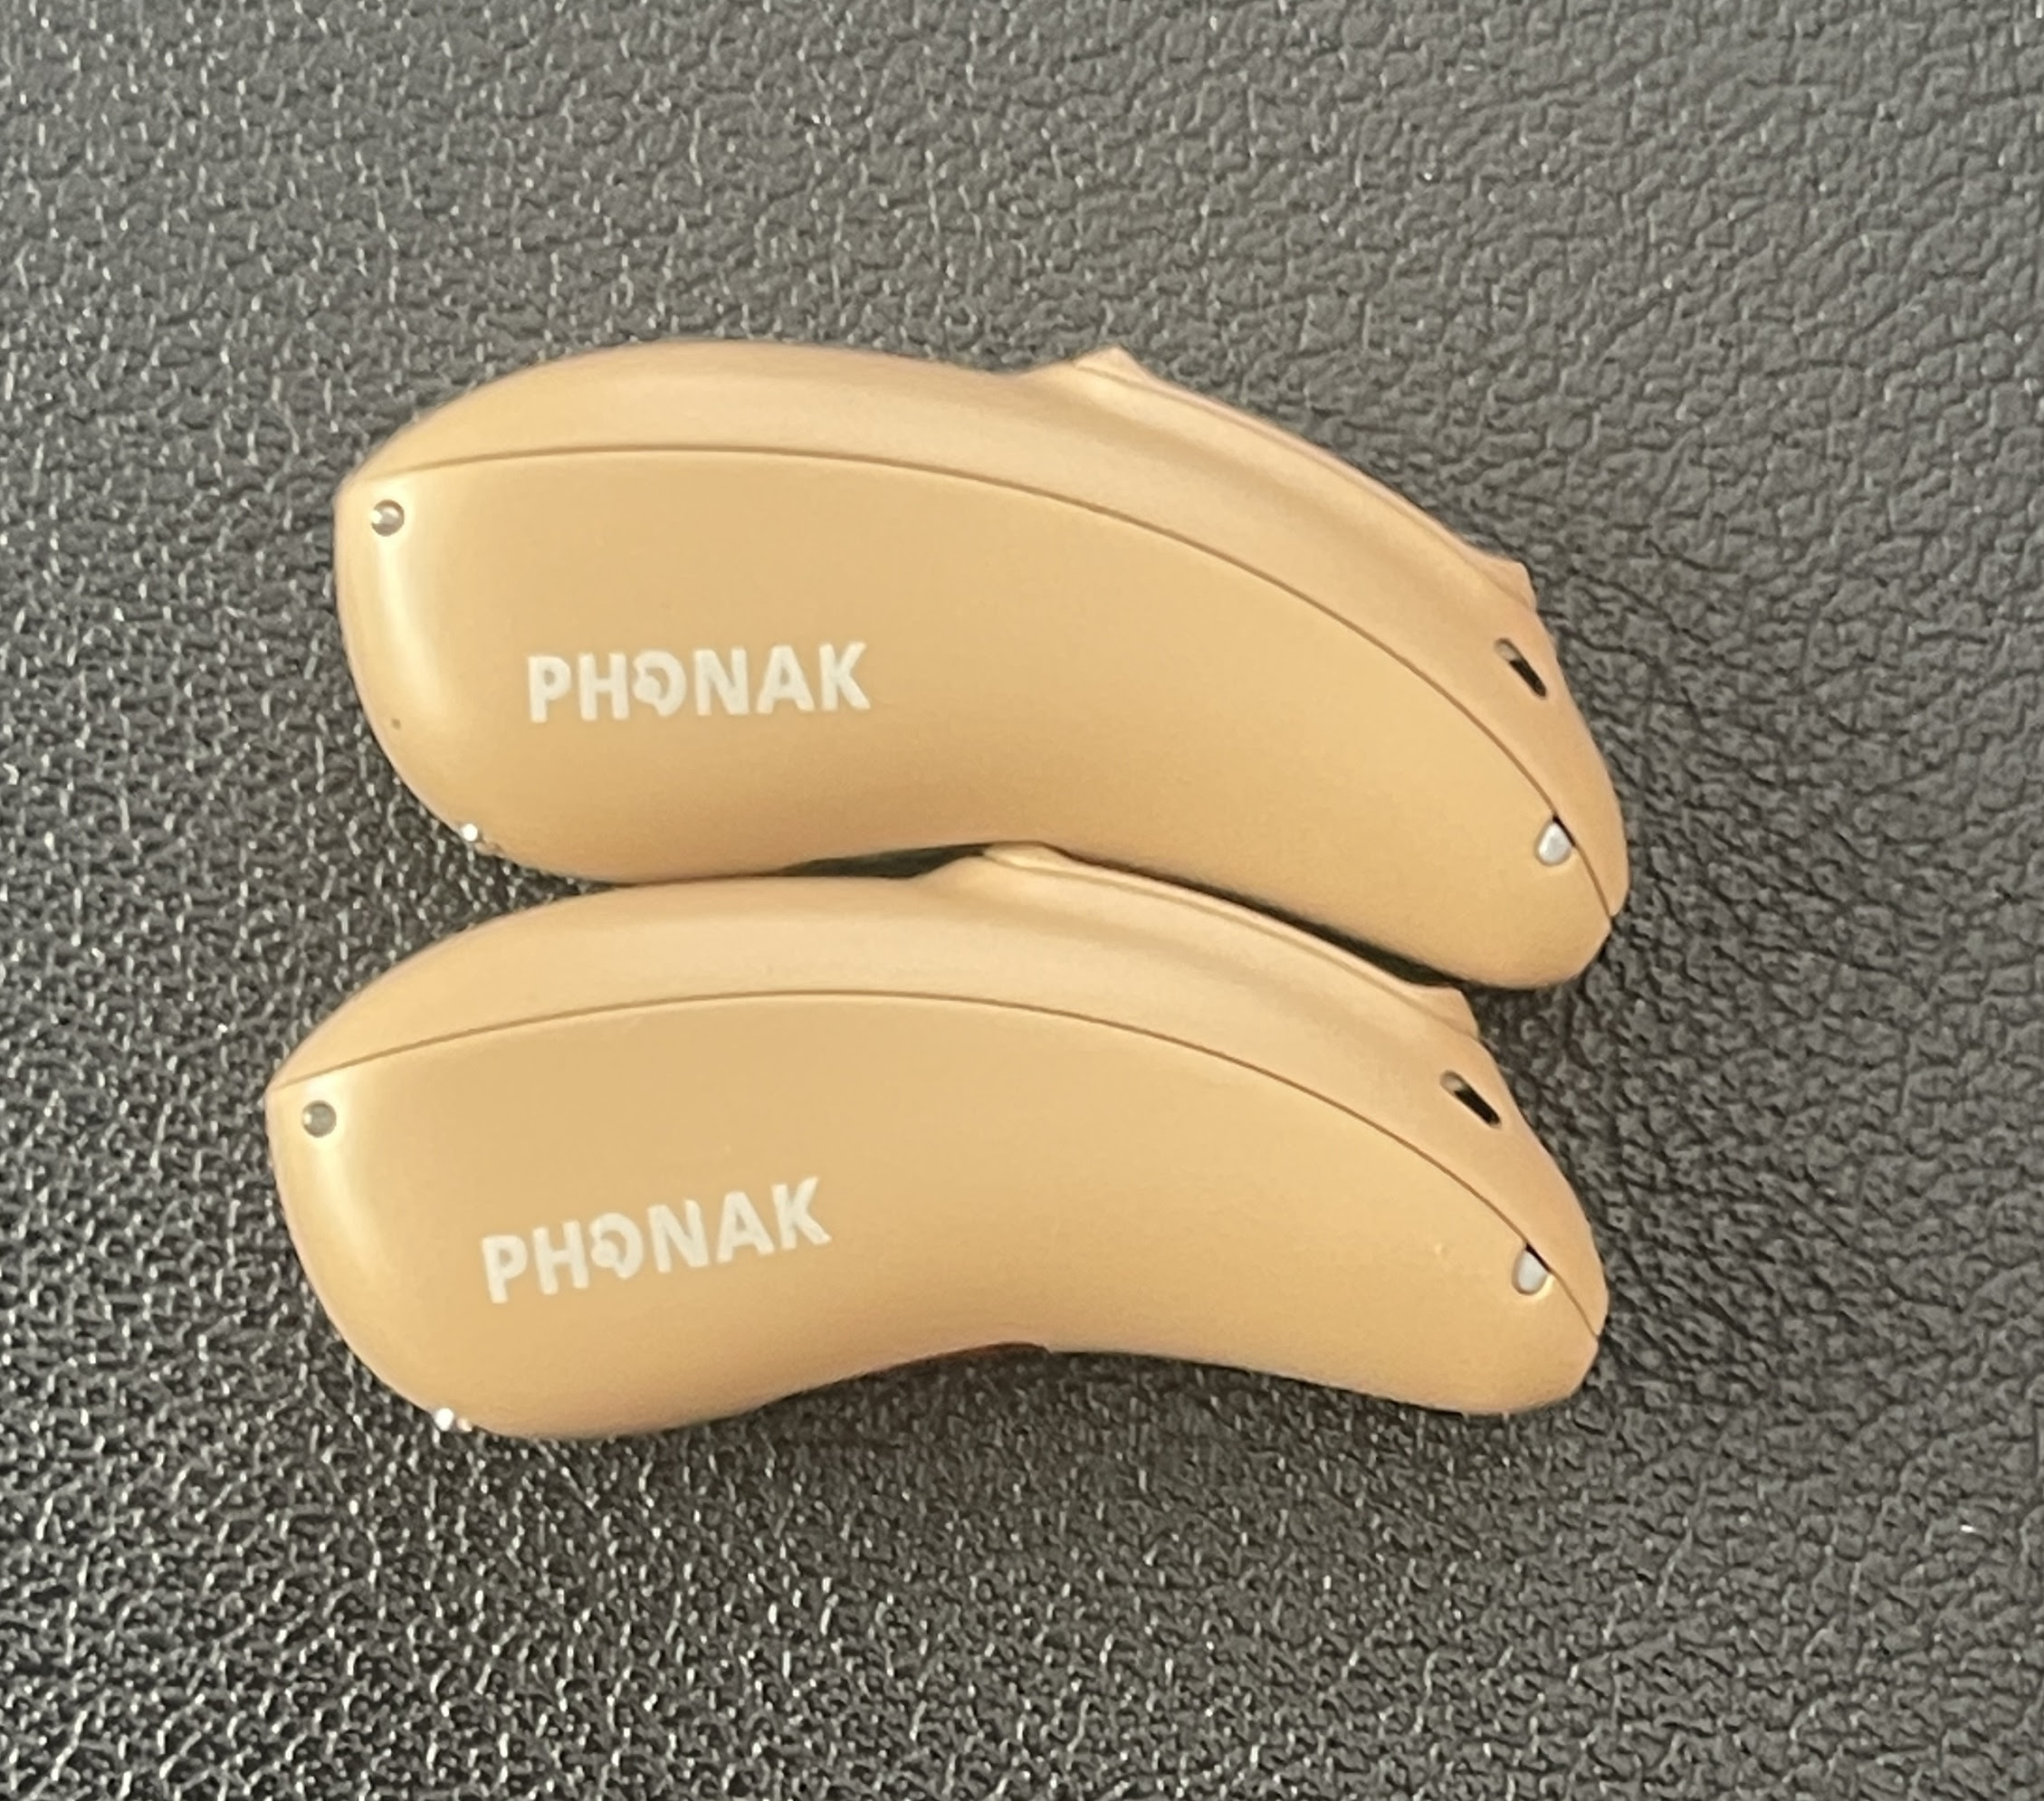 Phonak Paradise P90r Hearing Aids - GREAT for eBay  - One Pair MSRP is $4,000 - 10 Pairs Available